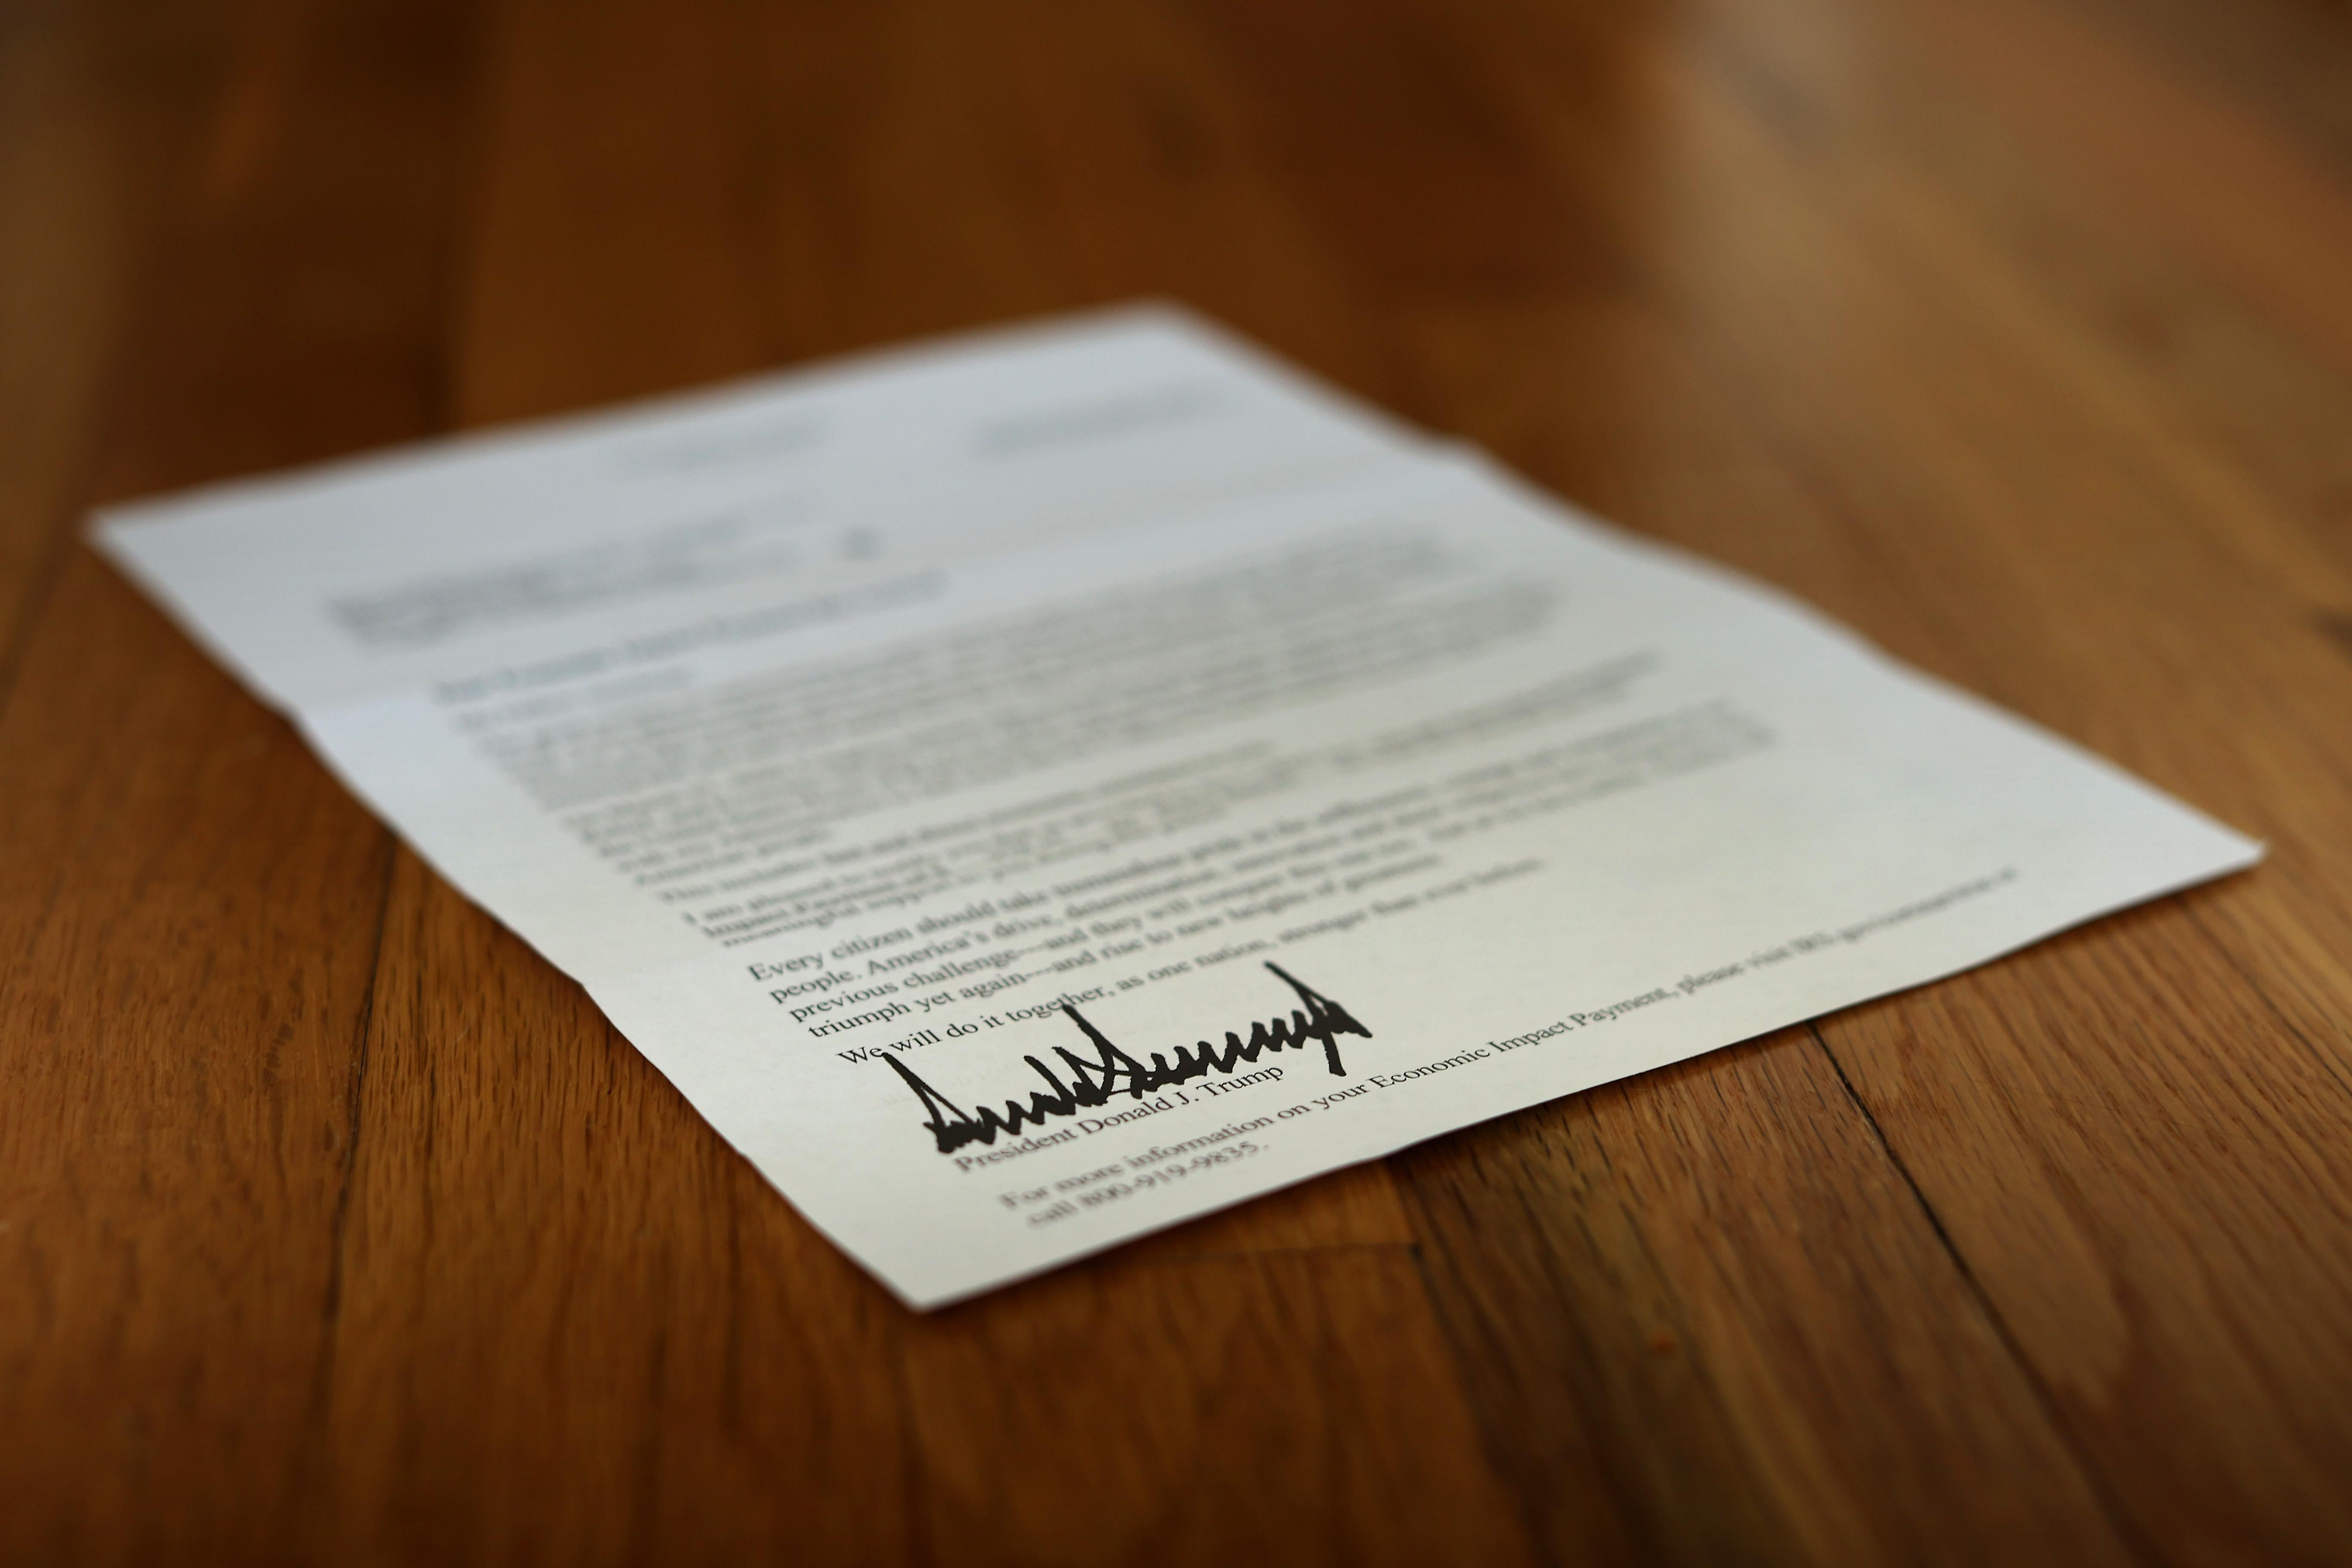 WASHINGTON, DC - APRIL 29: A letter bearing the signature of U.S. President Donald Trump was sent to people who received a coronavirus economic stimulus payment as part of the Cares Act April 29, 2020 in Washington, DC. The letter had a return address for the Internal Revenue Service in Austin, Texas, but was printed on White House letterhead. The initial 88 million payments totaling nearly $158 billion were sent by the Treasury Department last week as most of the country remains under stay-at-home orders due to the COVID-19 pandemic. (Photo by Chip Somodevilla/Getty Images)